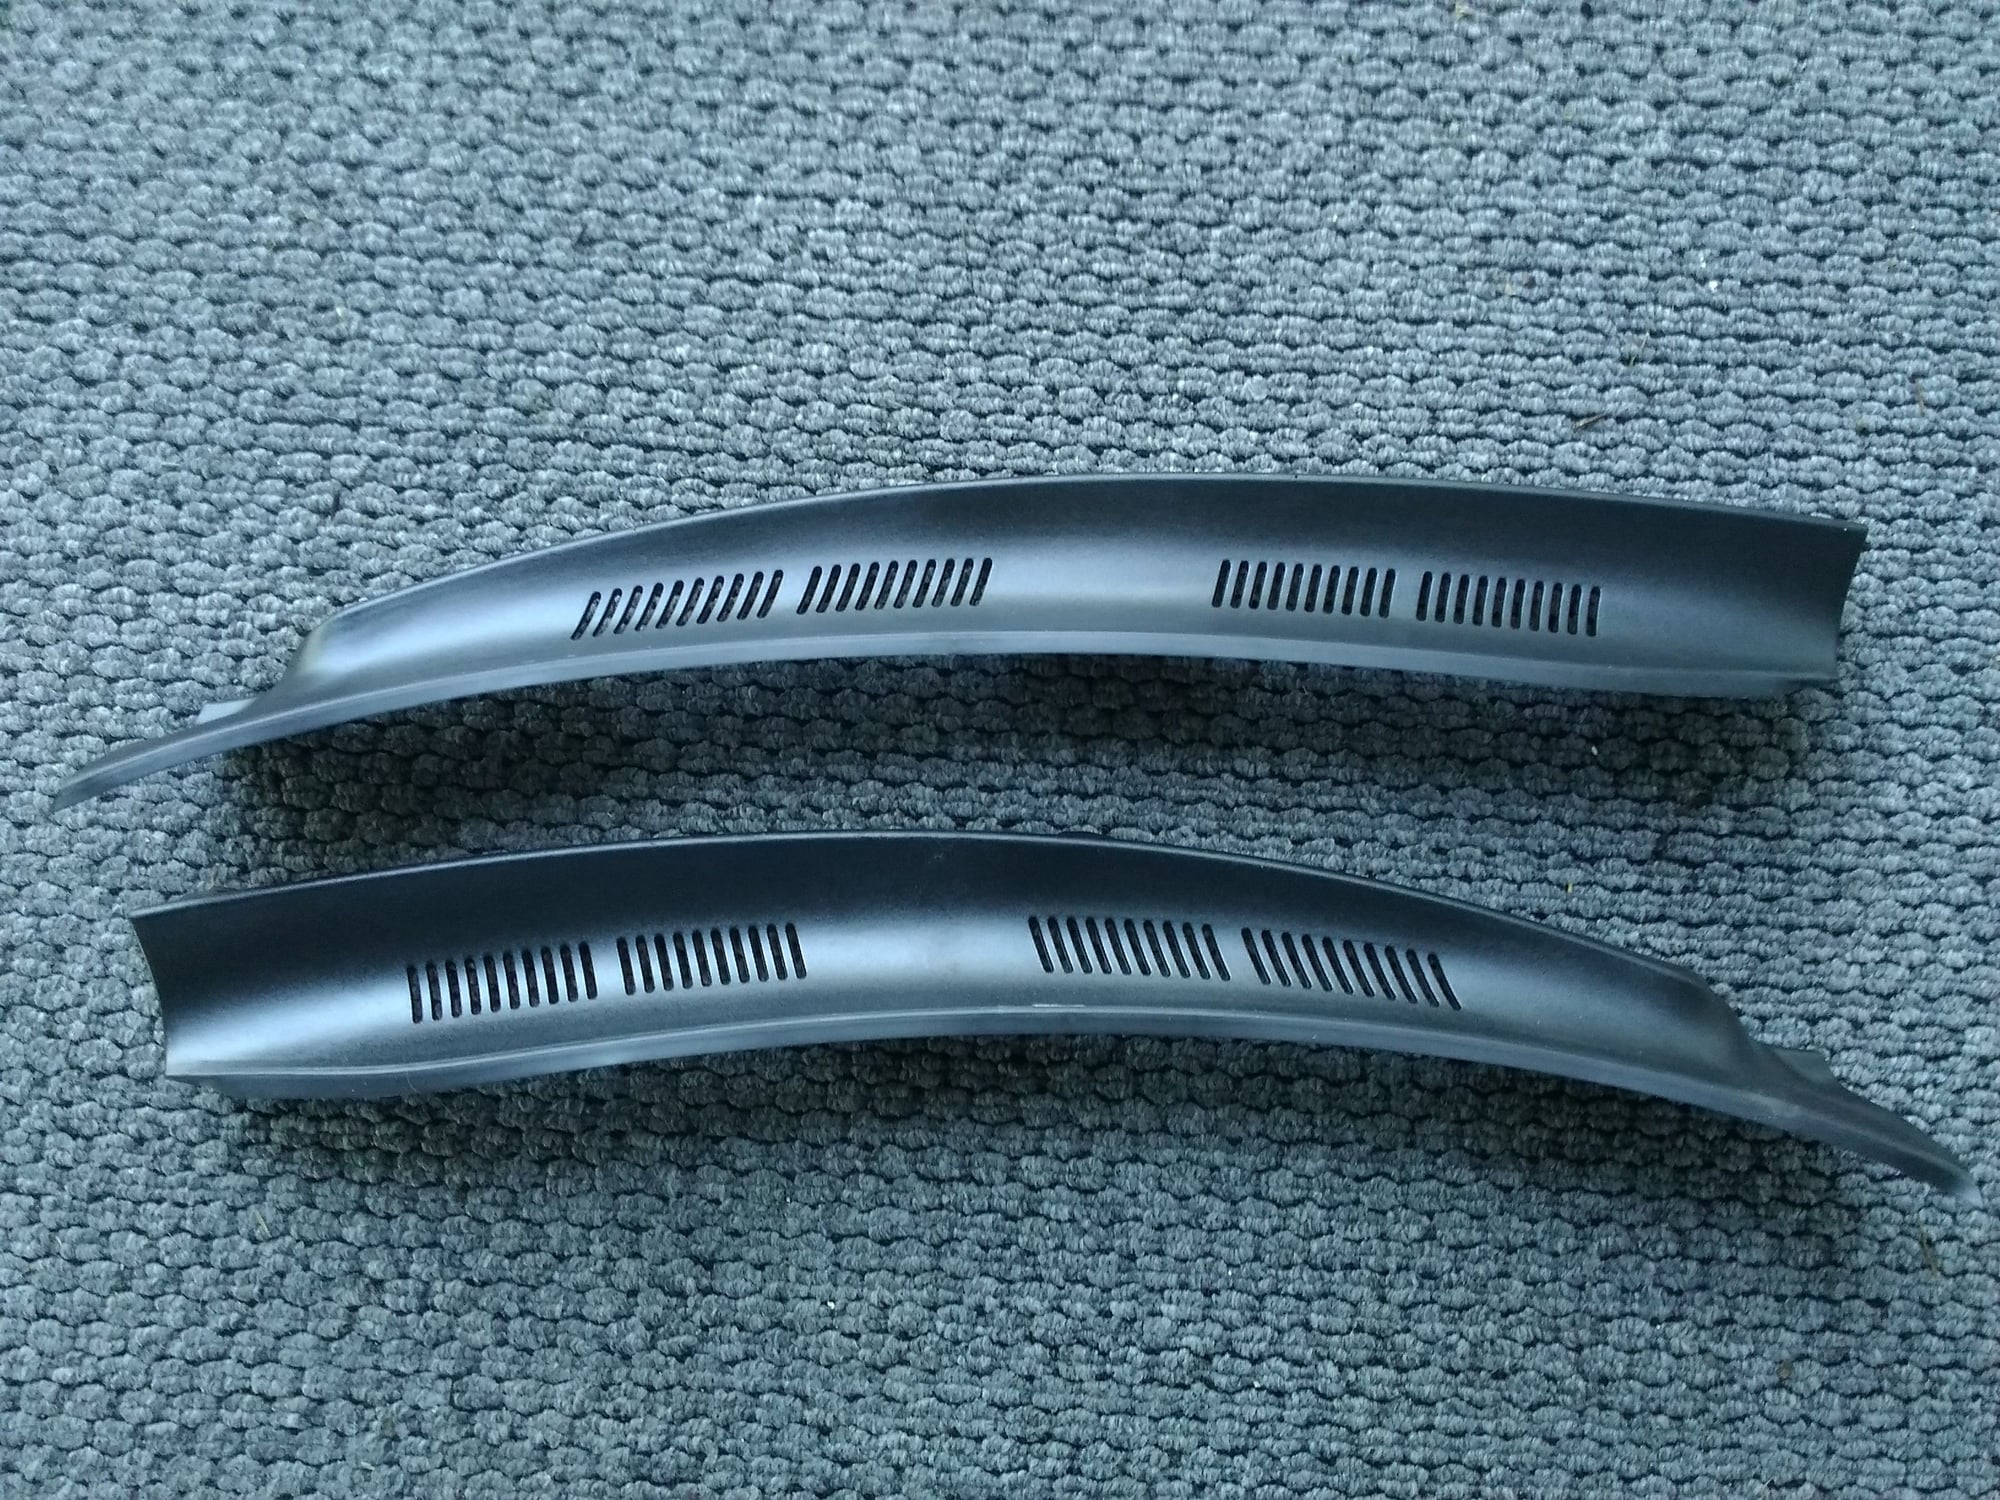 Exterior Body Parts - "Brand New OEM Mercedes W210 Windshield Cowl Screens - Left and Right" - New - 1996 to 2002 Mercedes-Benz E320 - Ft. Lauderdale, FL 33066, United States